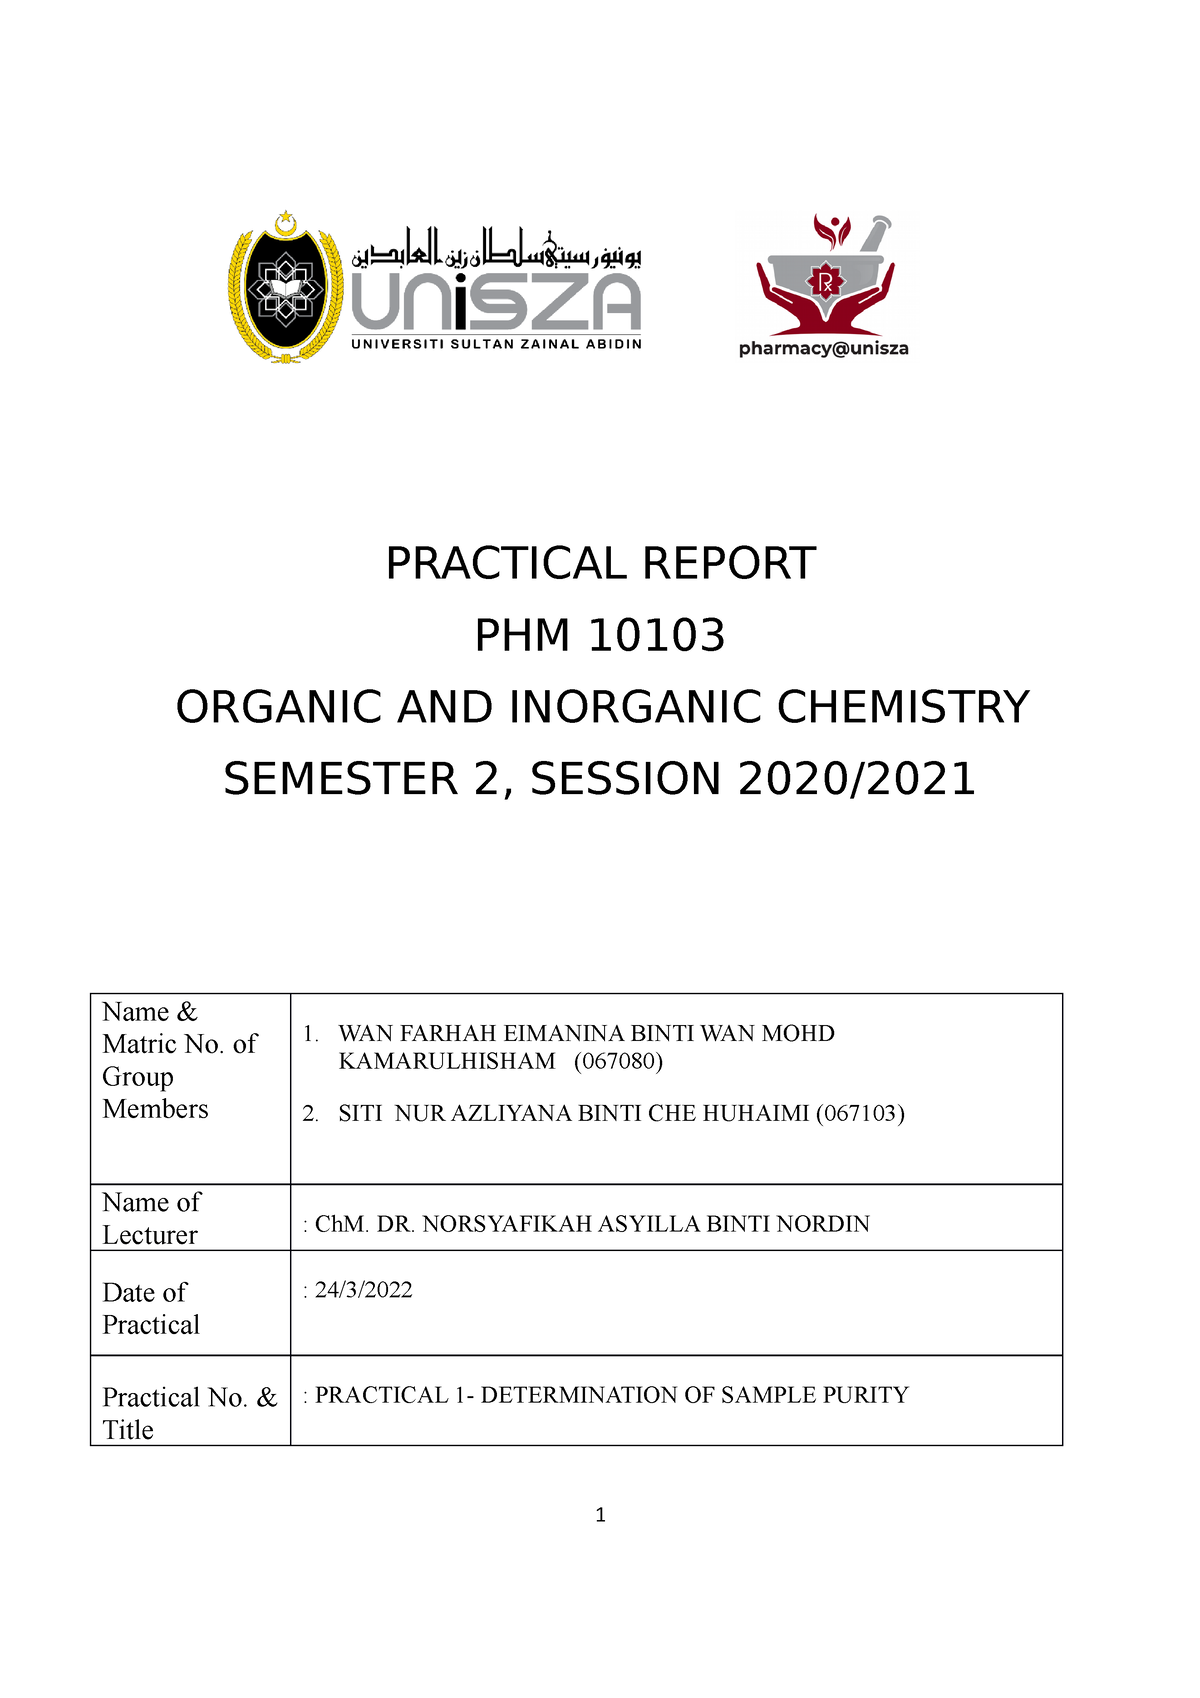 Lab Report – An Overview of the Semester